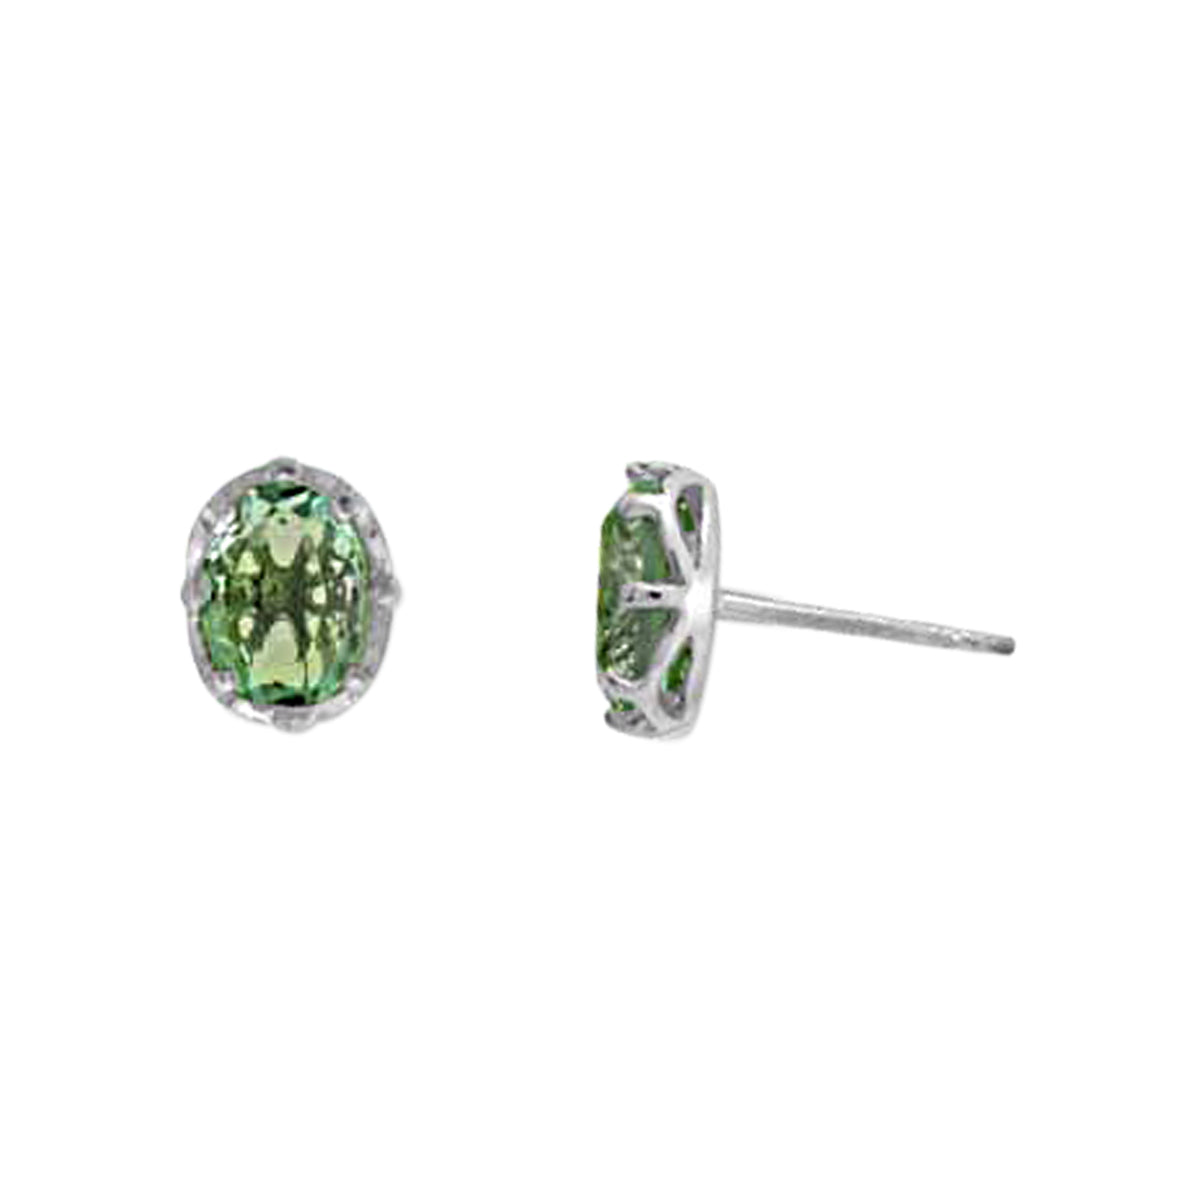 STERLING SILVER RHODIUM PROTECTED OVAL POST EARRINGS PERIDOT